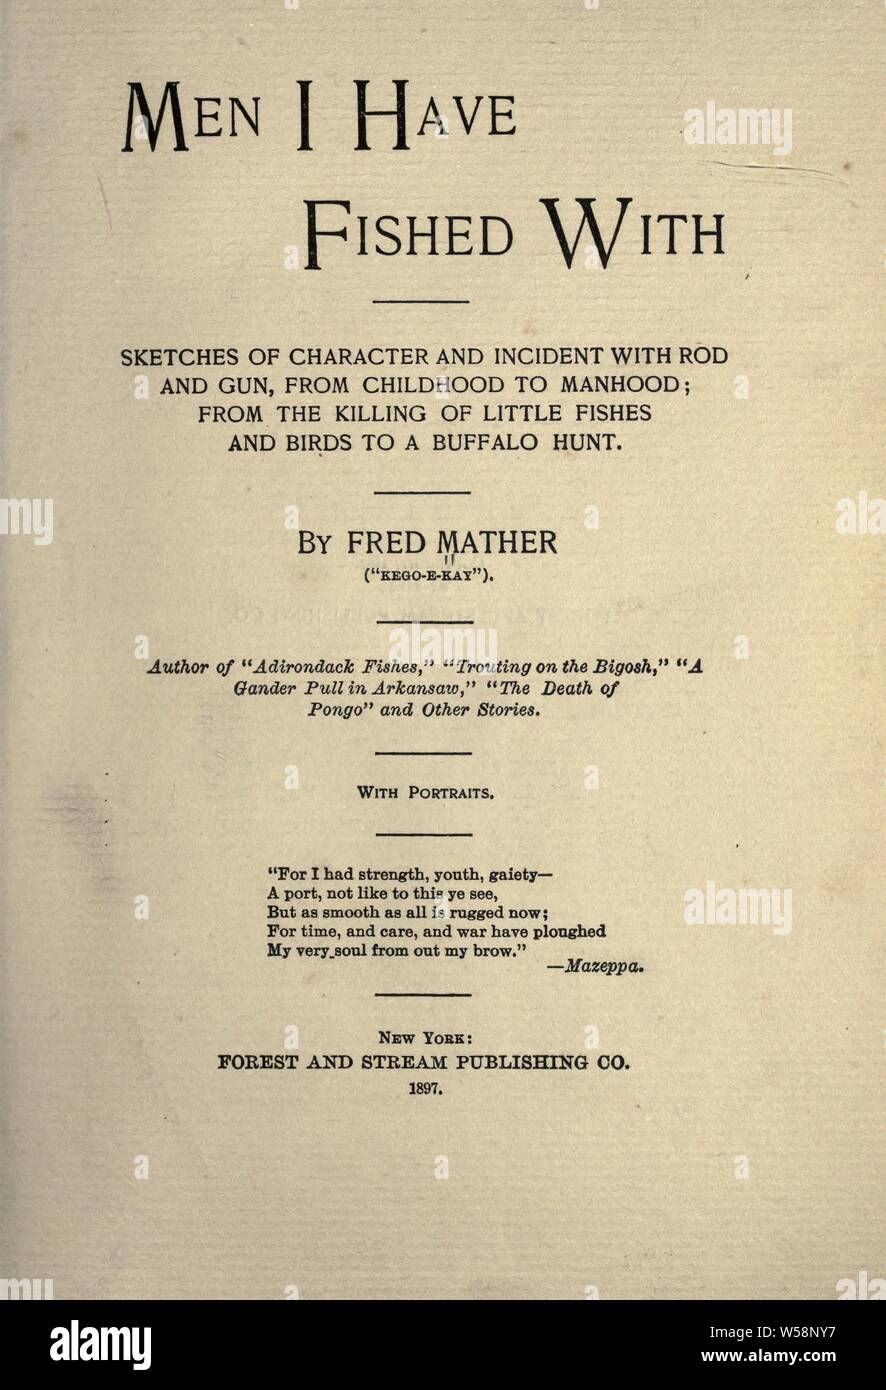 Men I have fished with; sketches of characters and incidents with rod and gun, from childhood to manhood, from the killing of little fishes and birds to a buffalo hunt : Mather, Fred, 1833-1900 Stock Photo